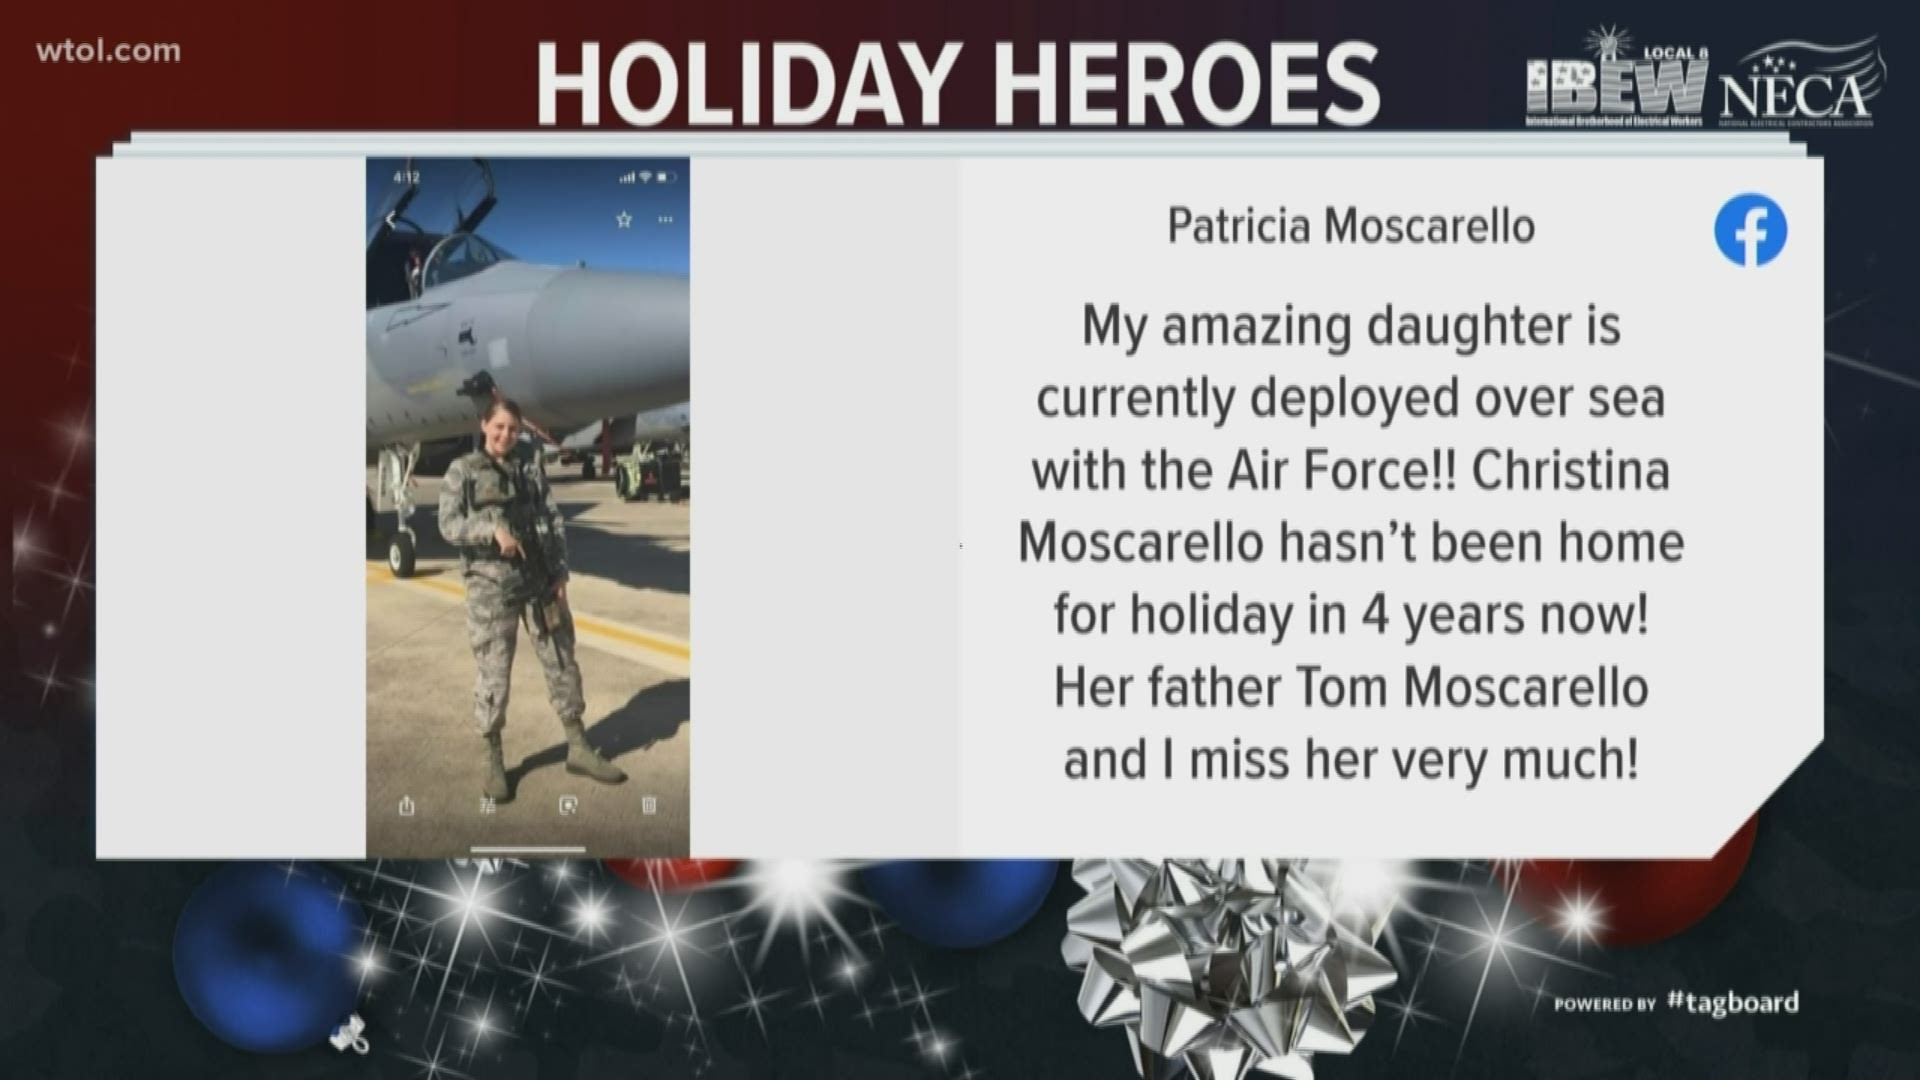 Today's hero: Christina Moscarello. Her mother says,  My amazing daughter is currently deployed oversea with the Air Force."